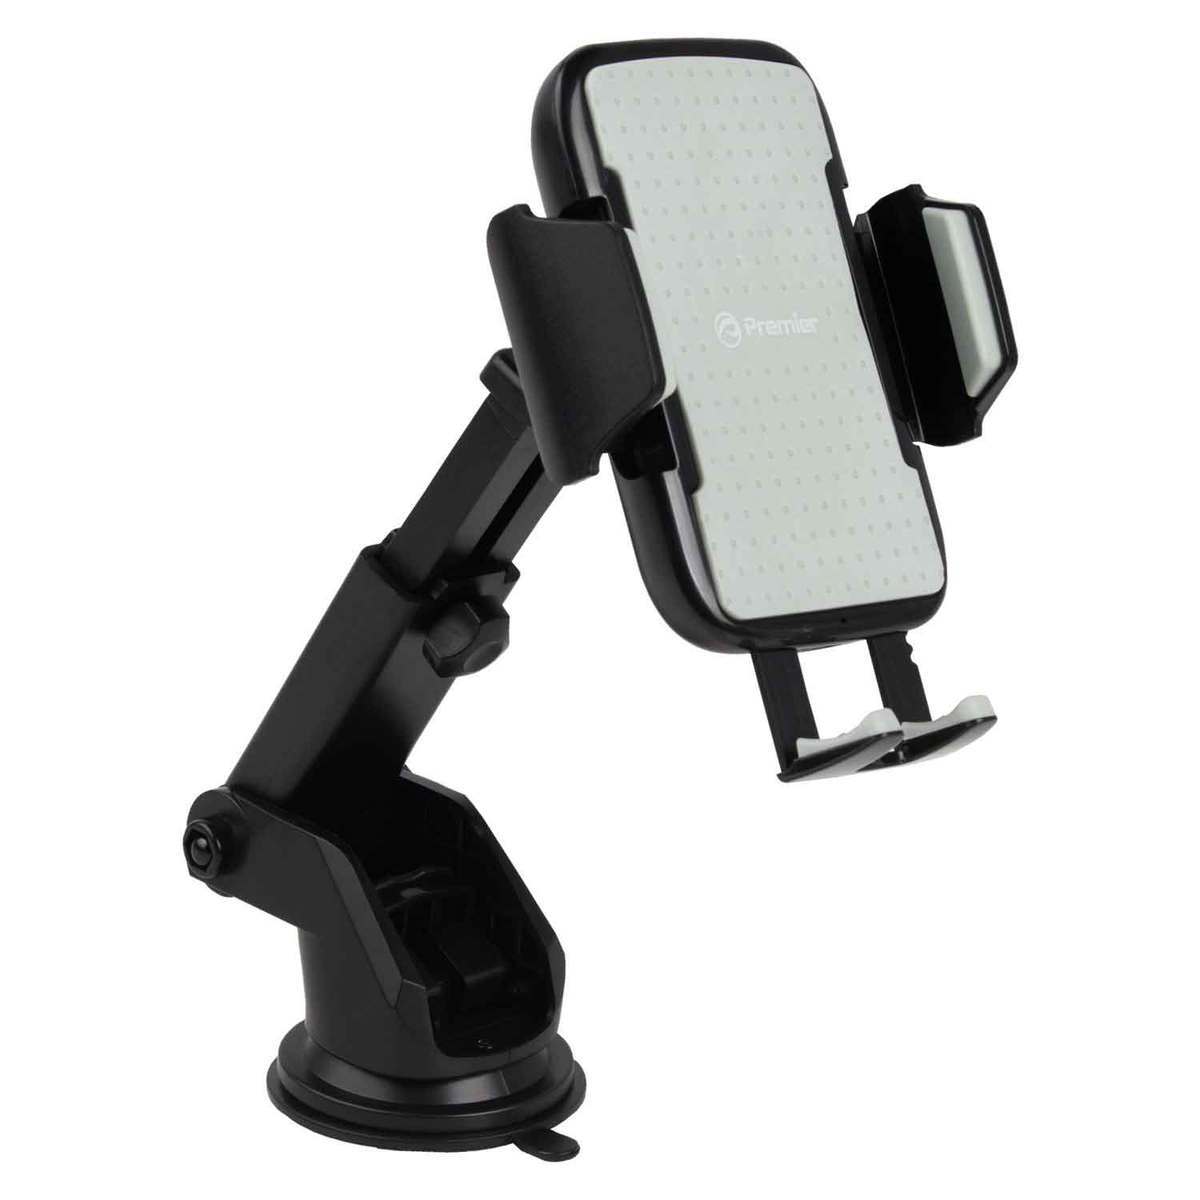 Car Suction Cup Mount Support Midland: buy online - Midland